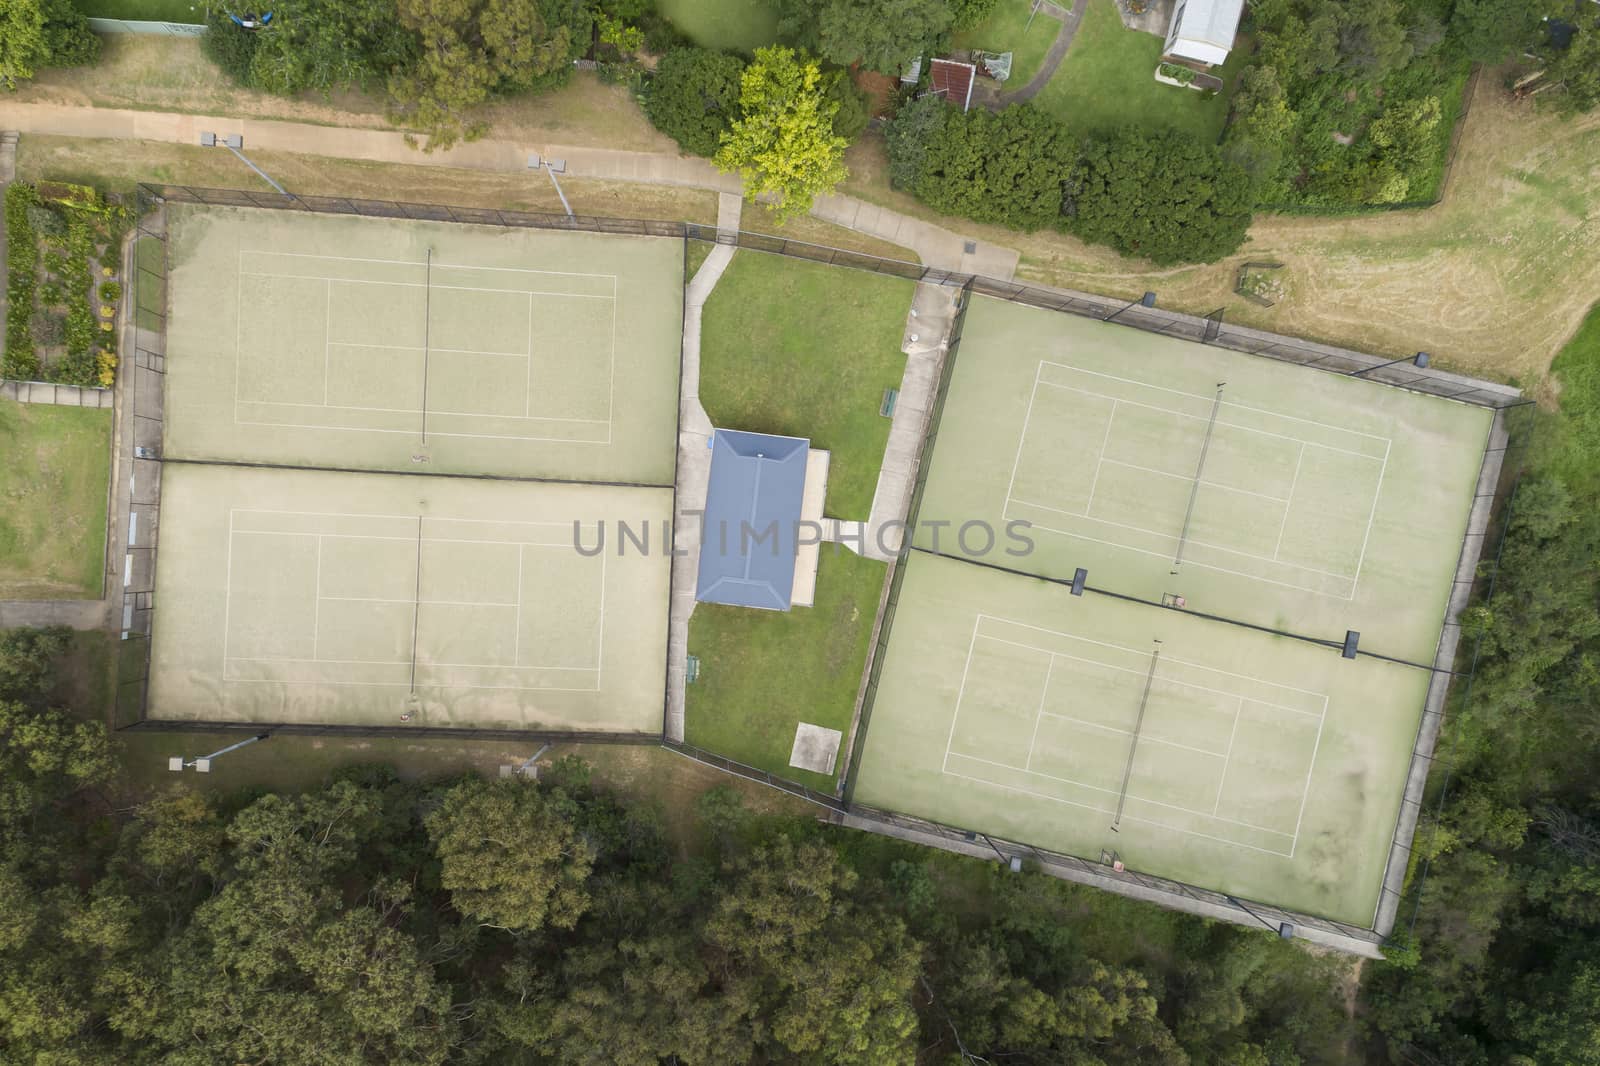 An overhead view of a tennis court in the suburbs